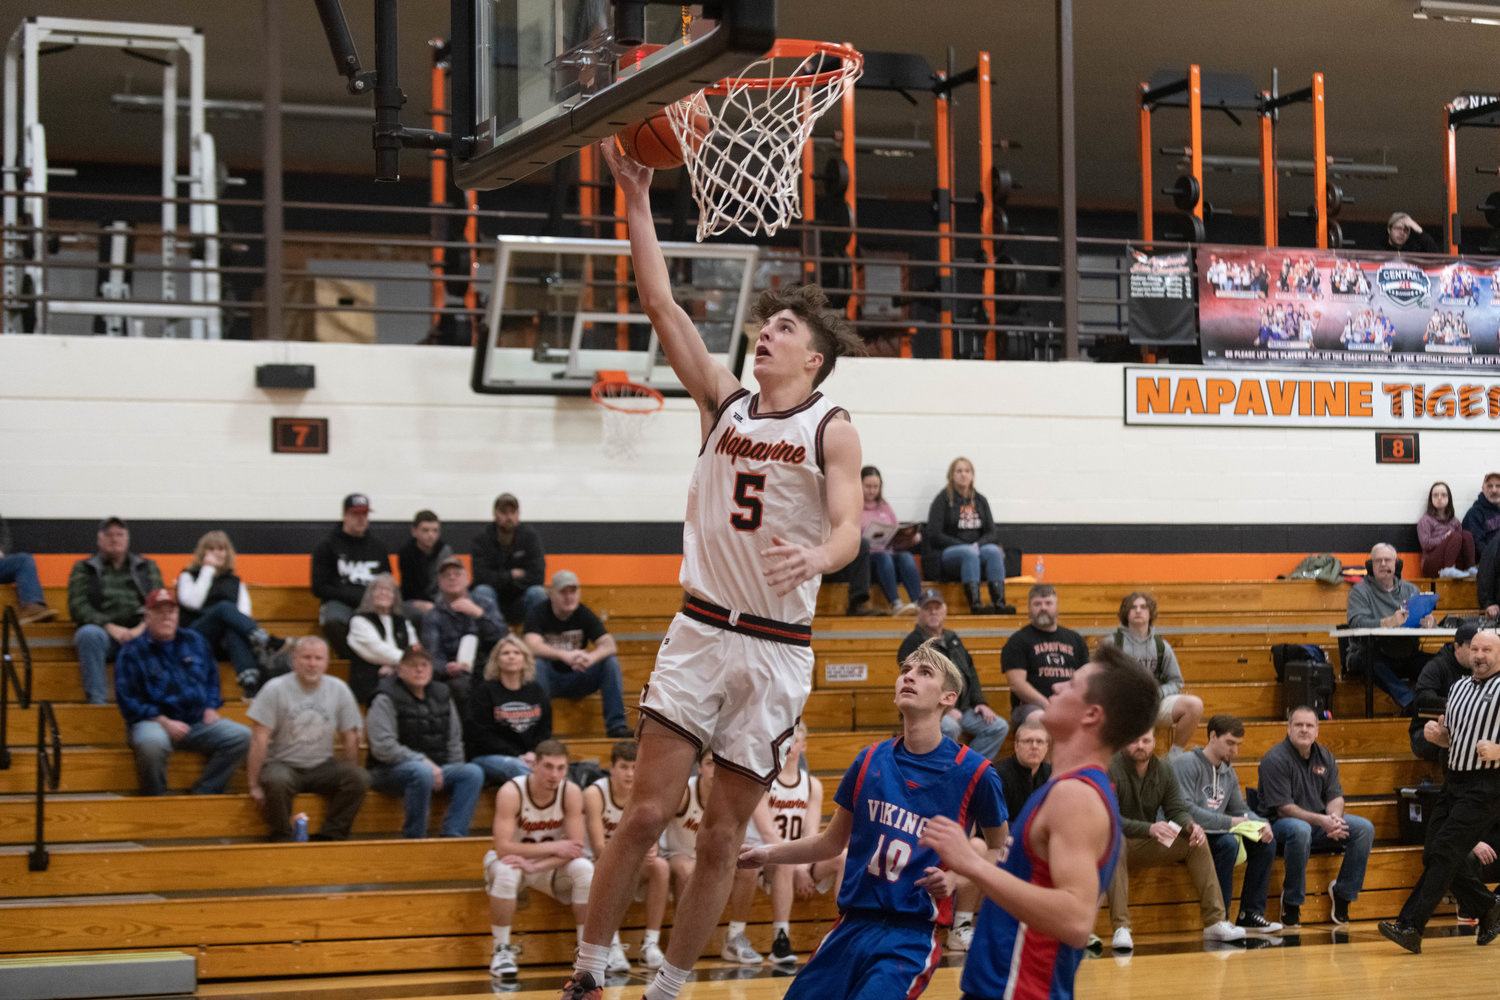 Karsen Denault goes up for two points in transition during Napavine's 81-50 win over Willapa Valley on Dec. 27.